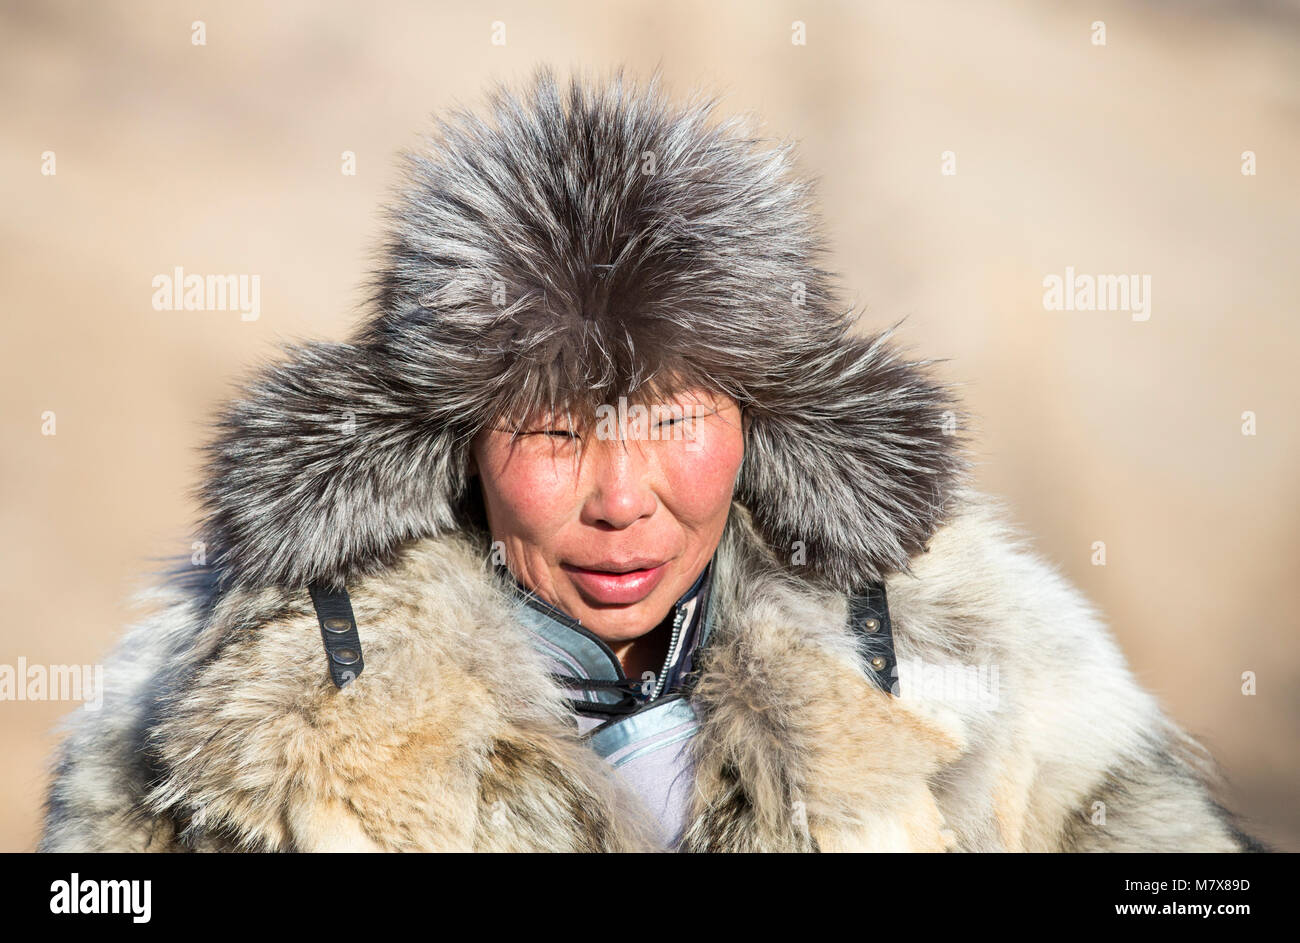 Hatgal, Mongolia, 4th March 2018: mongolian people dressed in traditional clothing on a frozen lake Khuvsgul Stock Photo